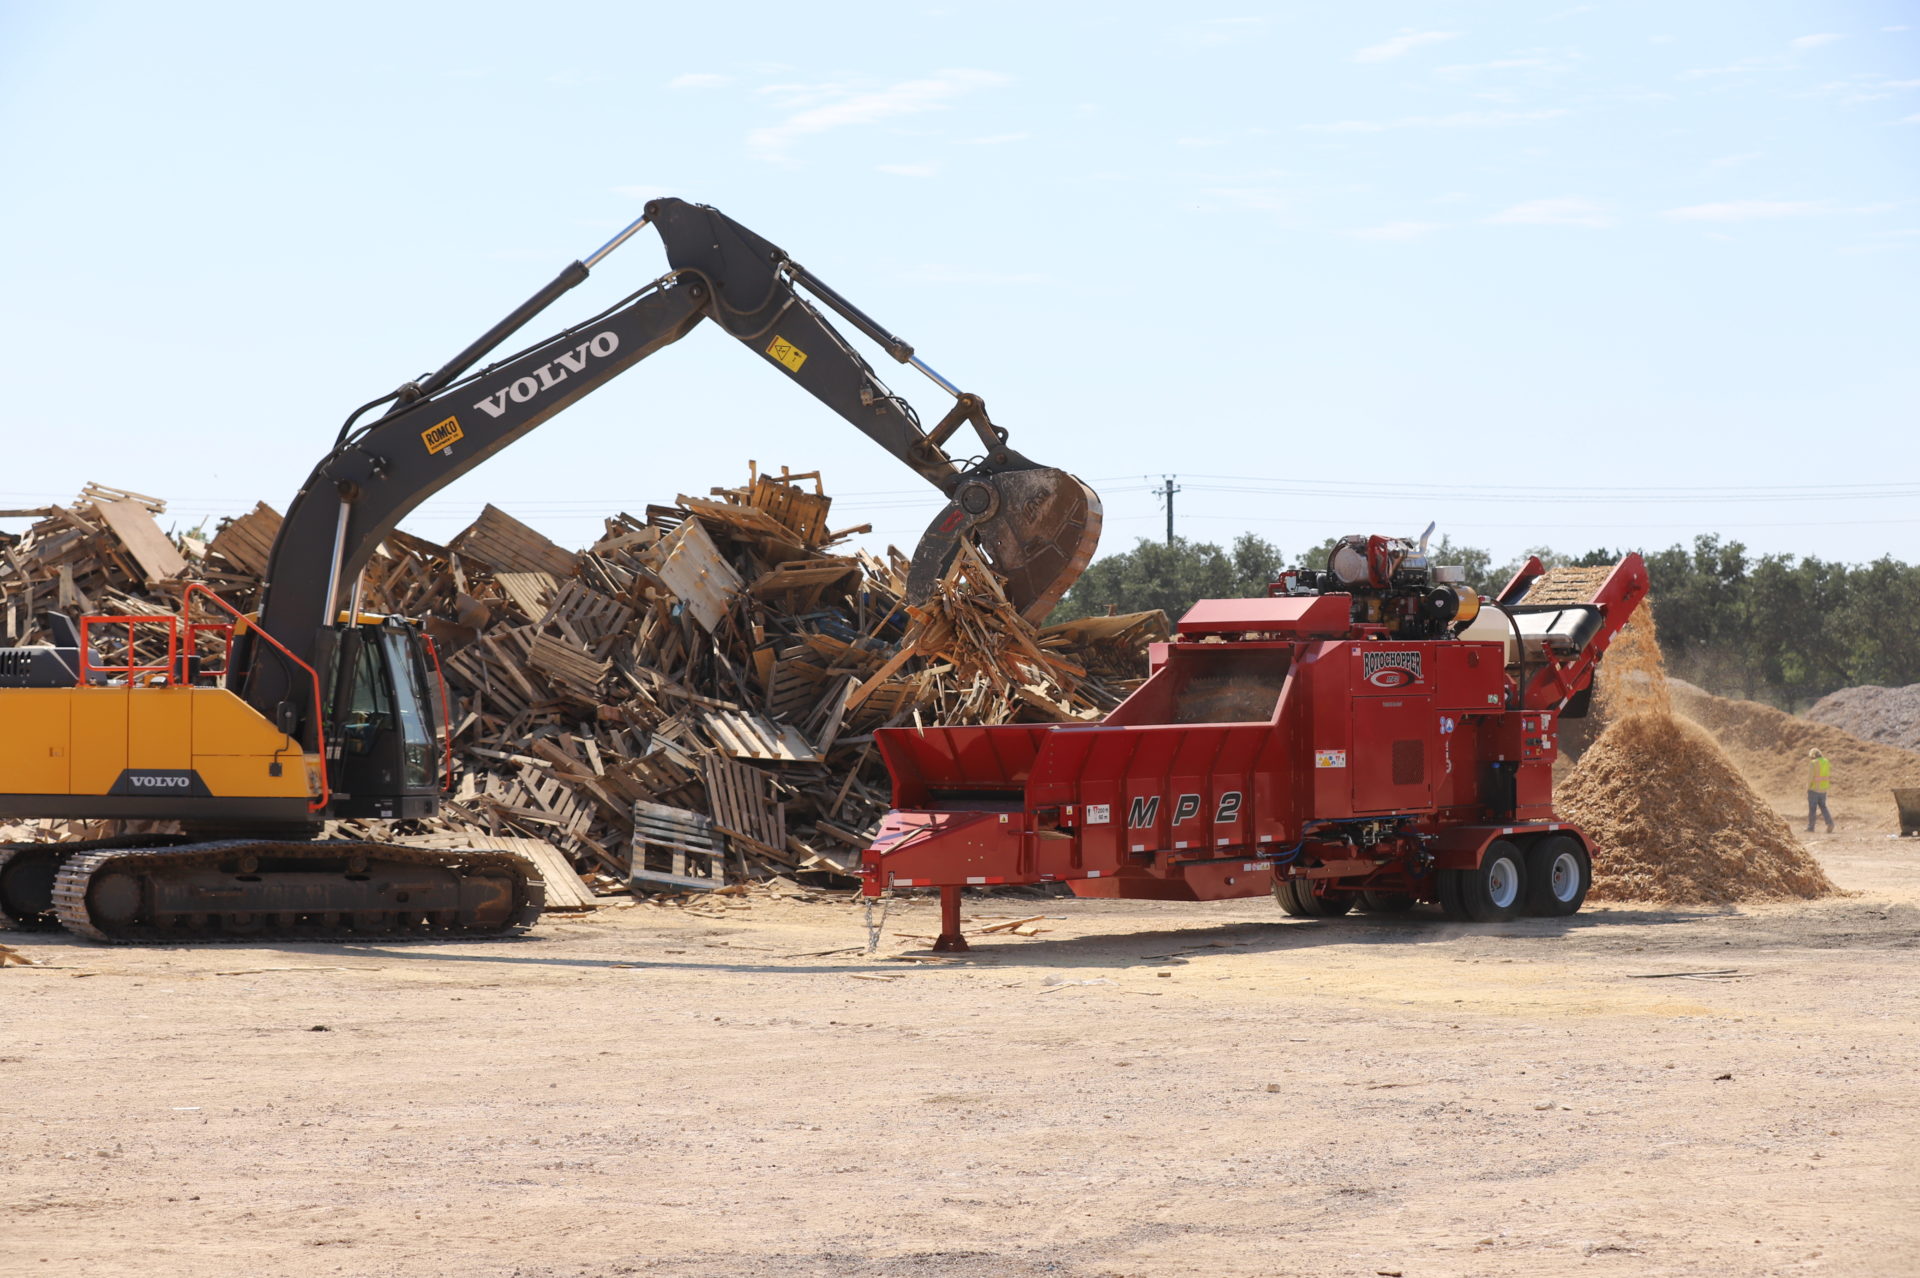 Excavator placing debris to be ground up in a Rotochopper grinding machine at Rotochopper Texas Field Day.